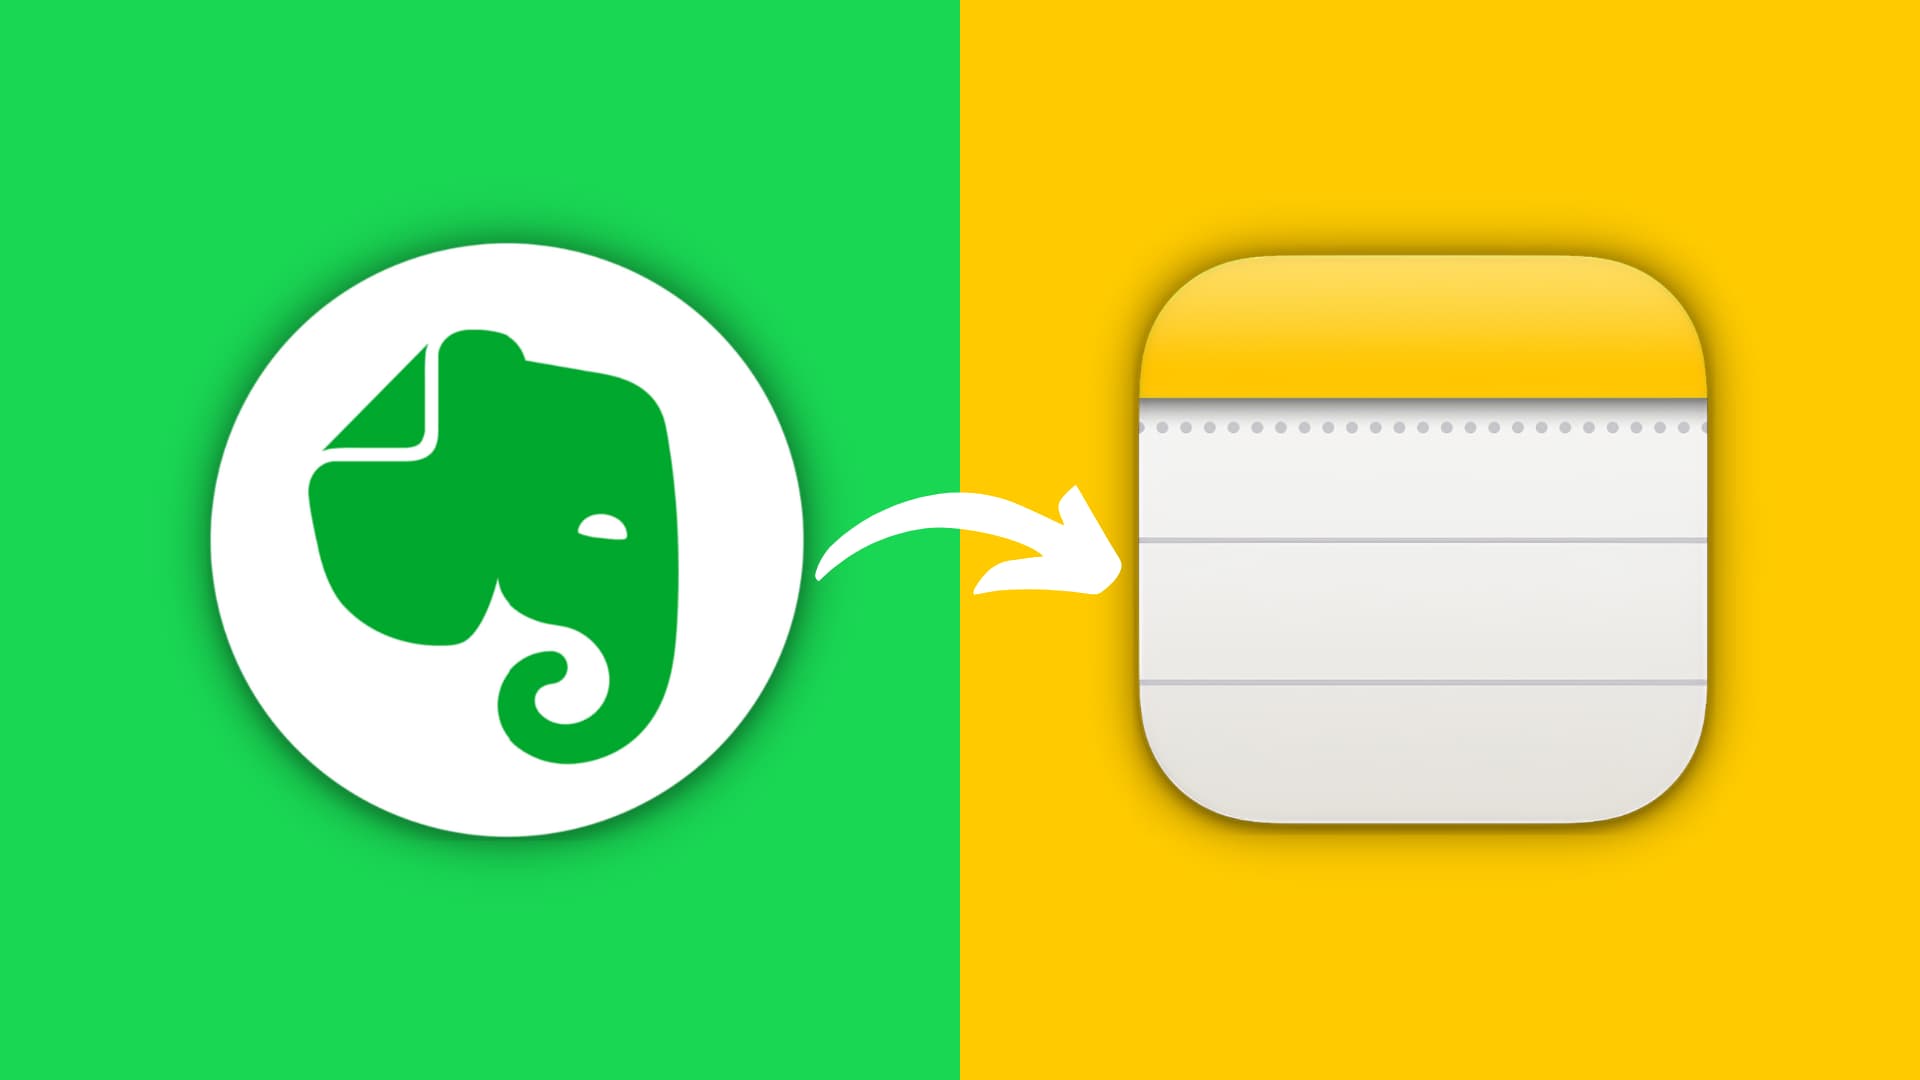 Evernote and Apple Notes app icons with a curved arrow indicating the import of Evernote notes to Apple Notes app